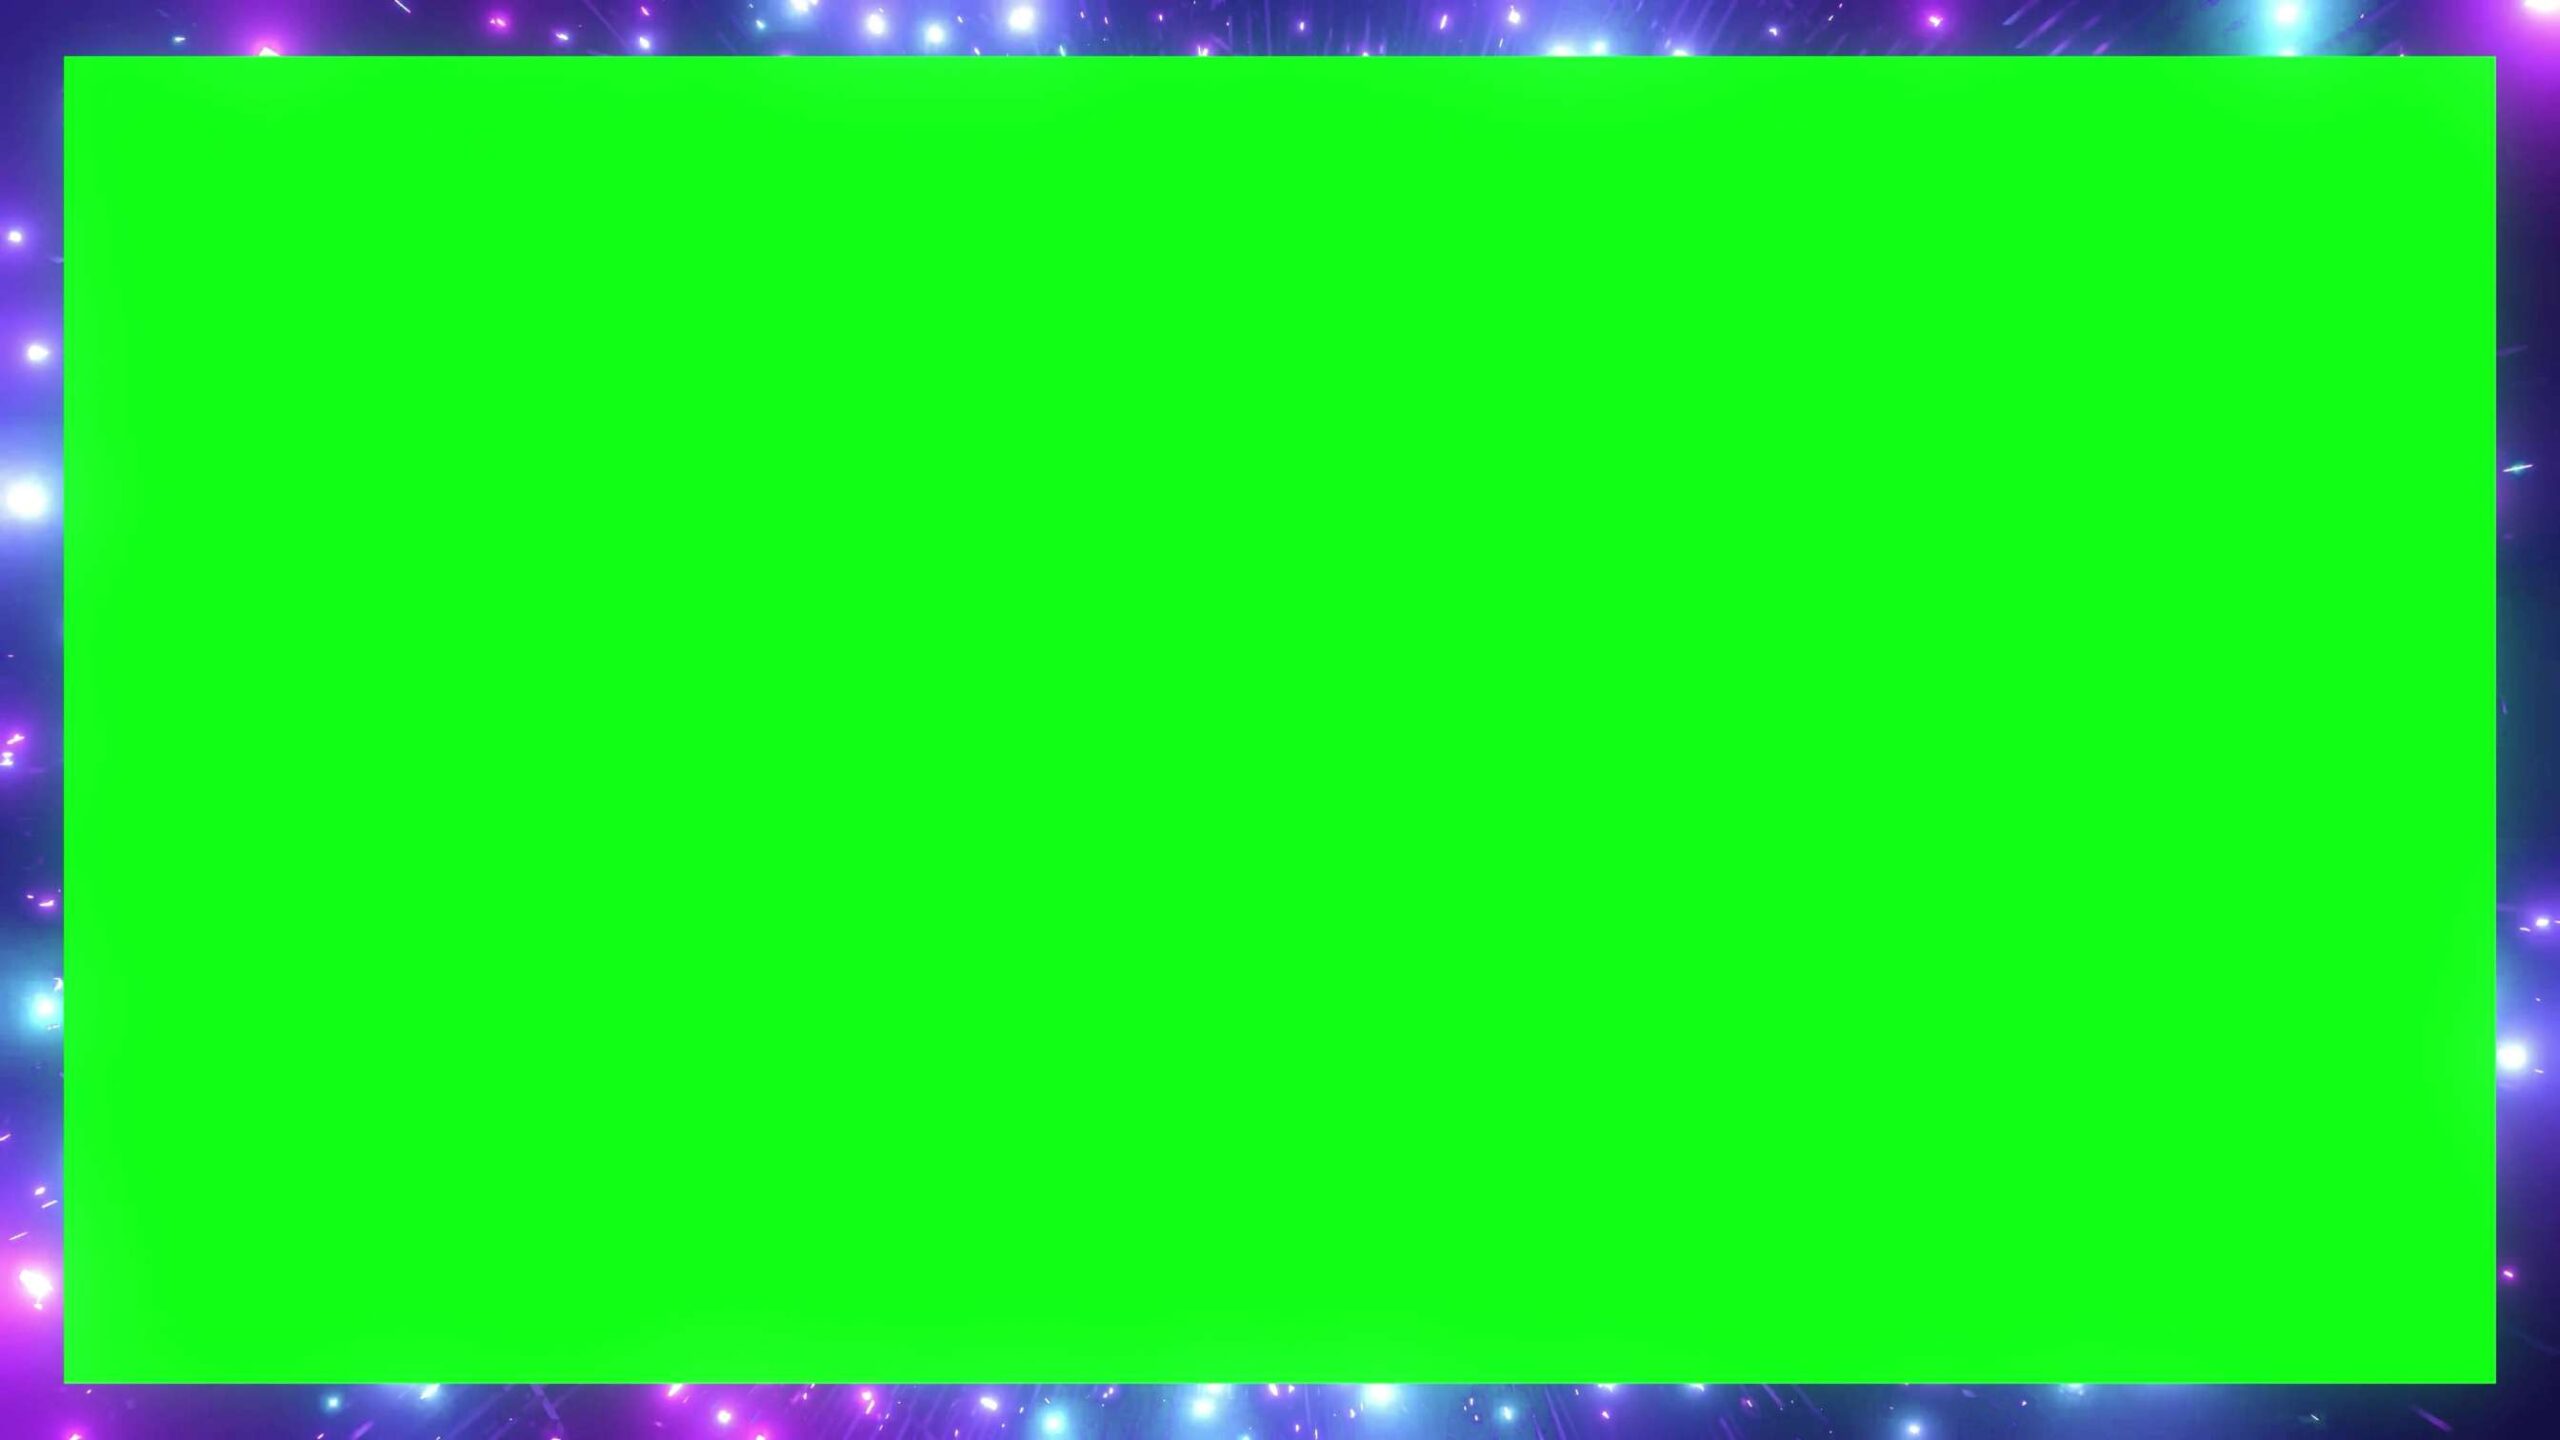 4K Gleaming Lights Borders Green Screen Effect FREE DOWNLOAD